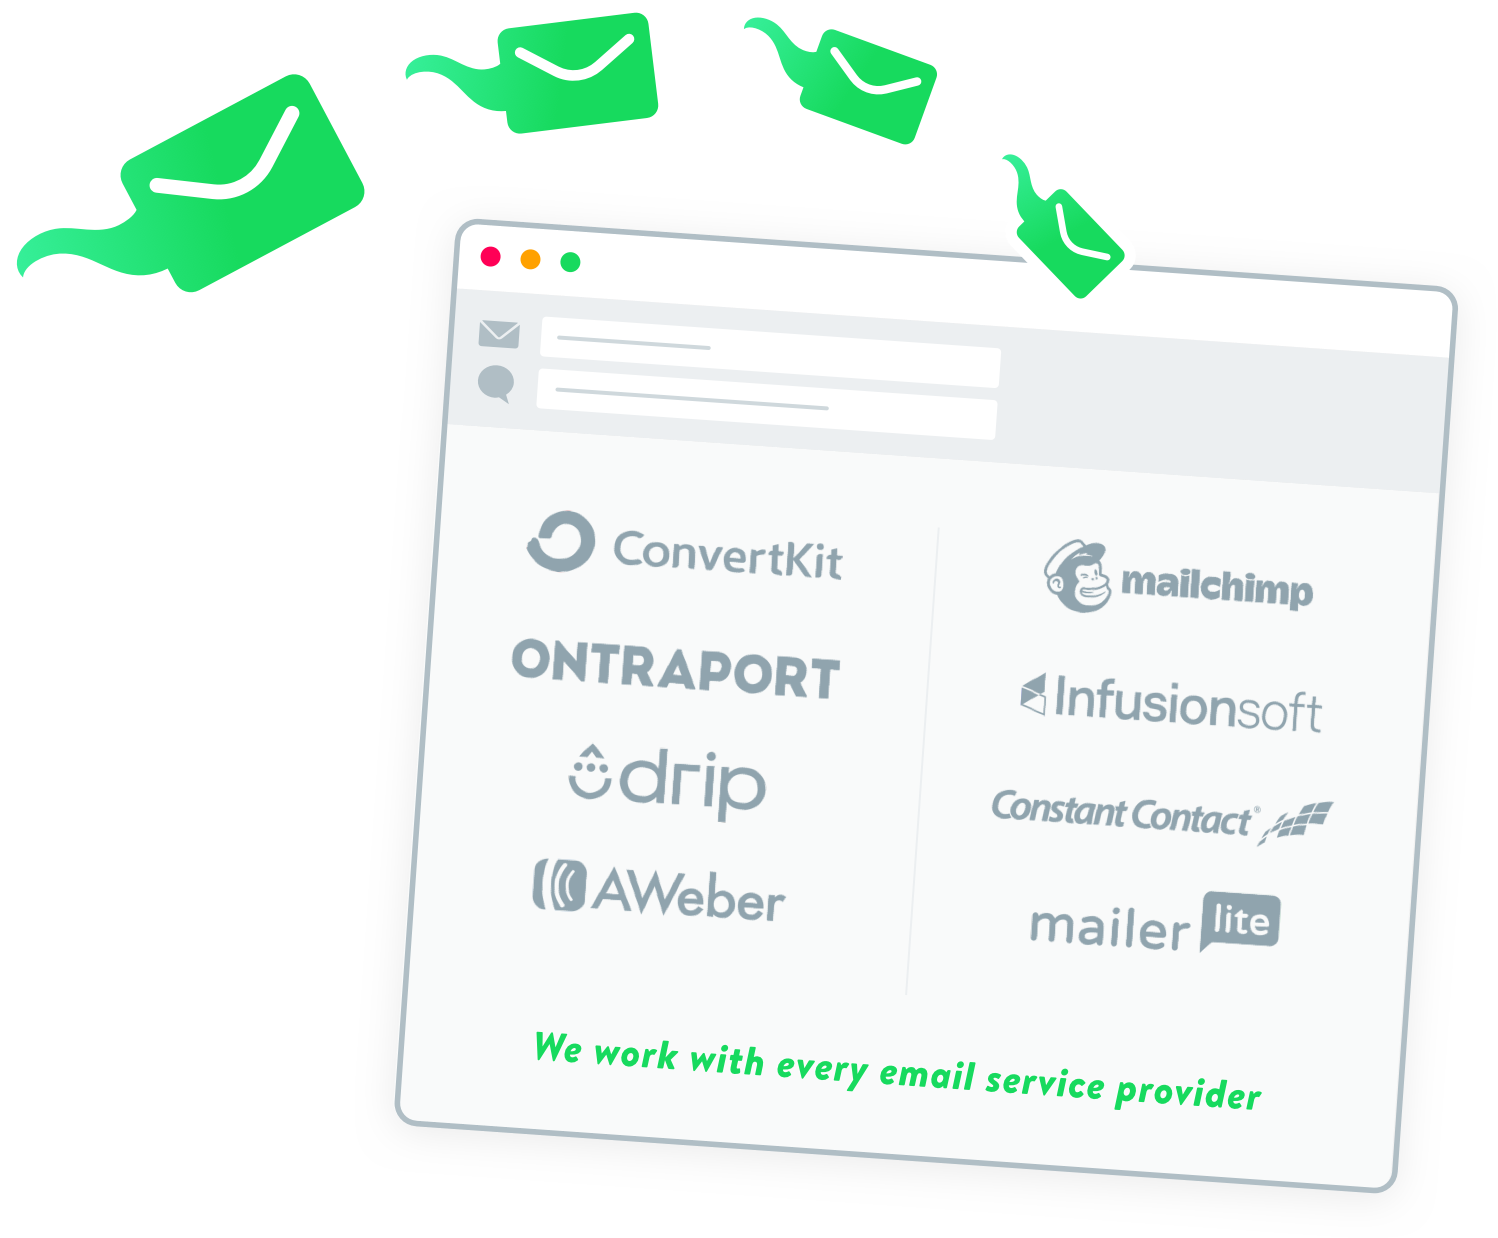 Drip Scripts works with every email service provider.